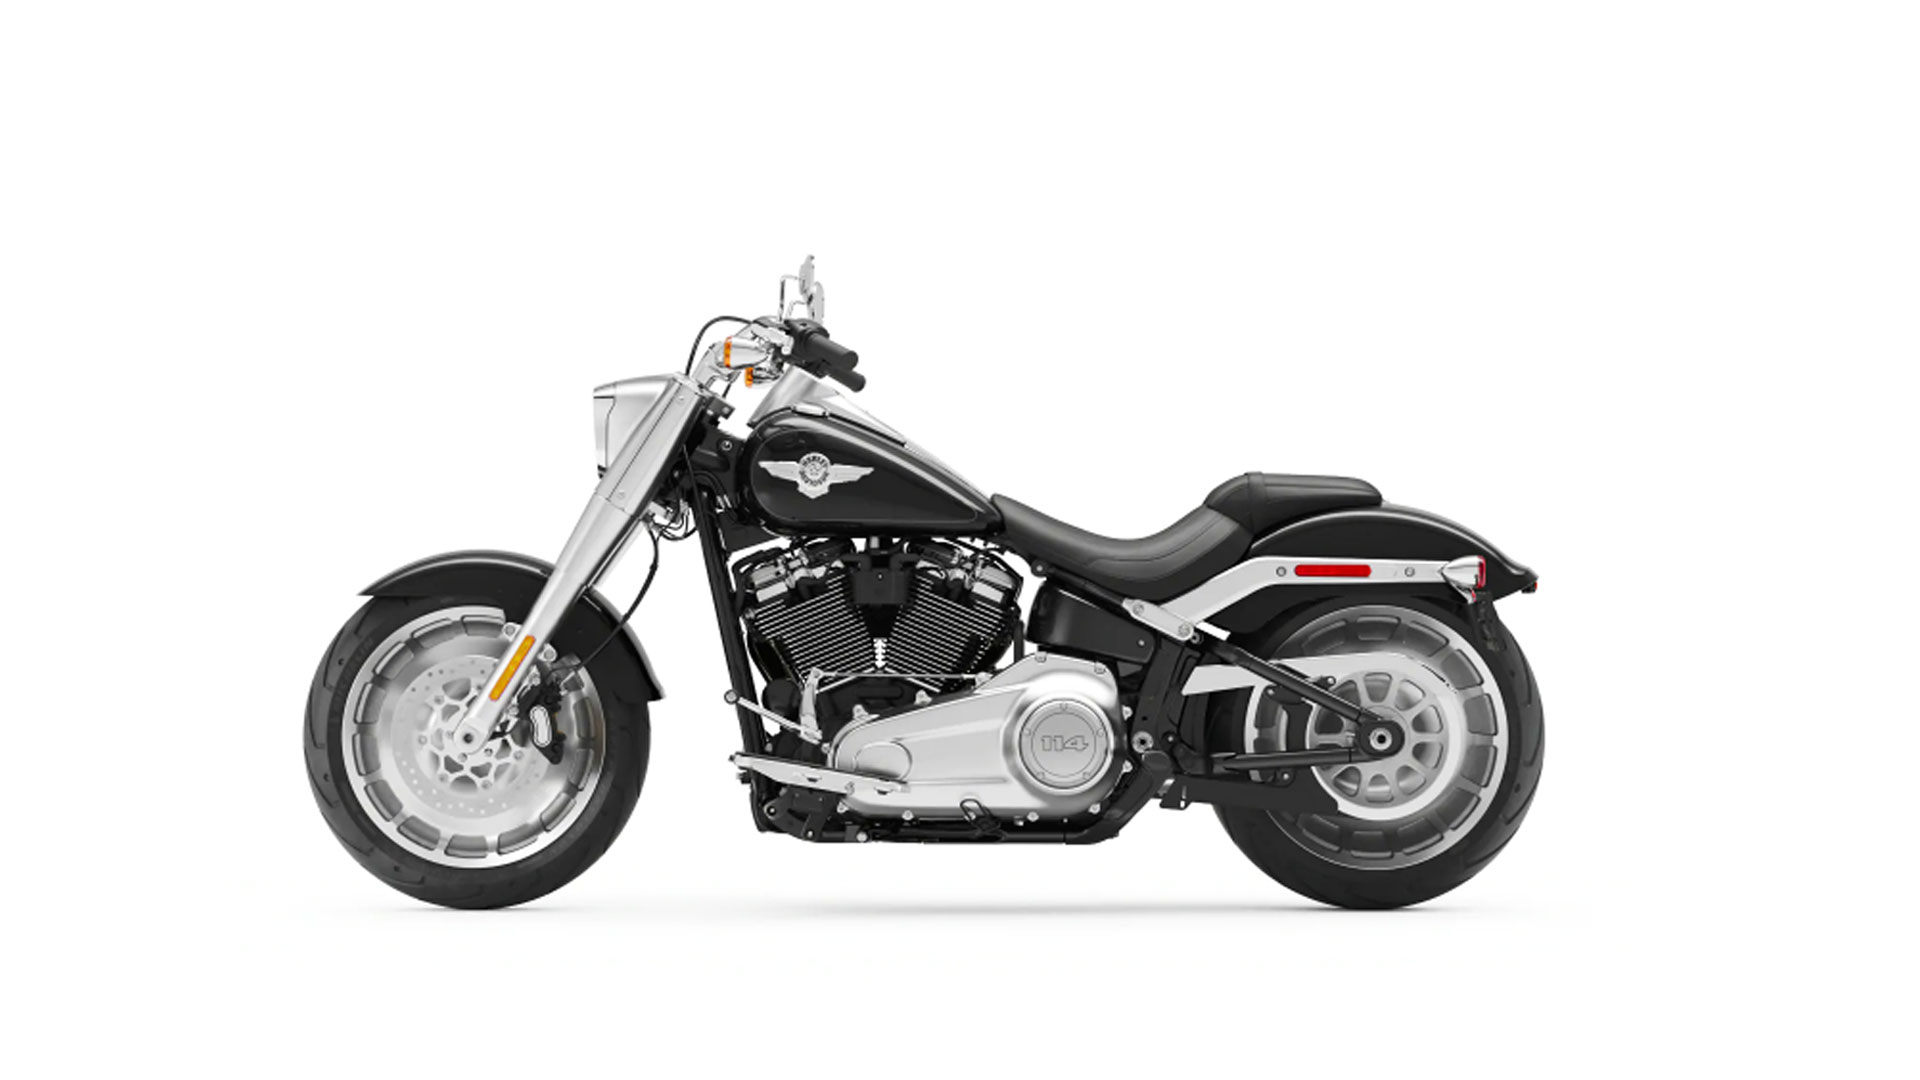 Harley Davidson Fat Boy 2018 115th Anniversary 114 Price Mileage Reviews Specification Gallery Overdrive